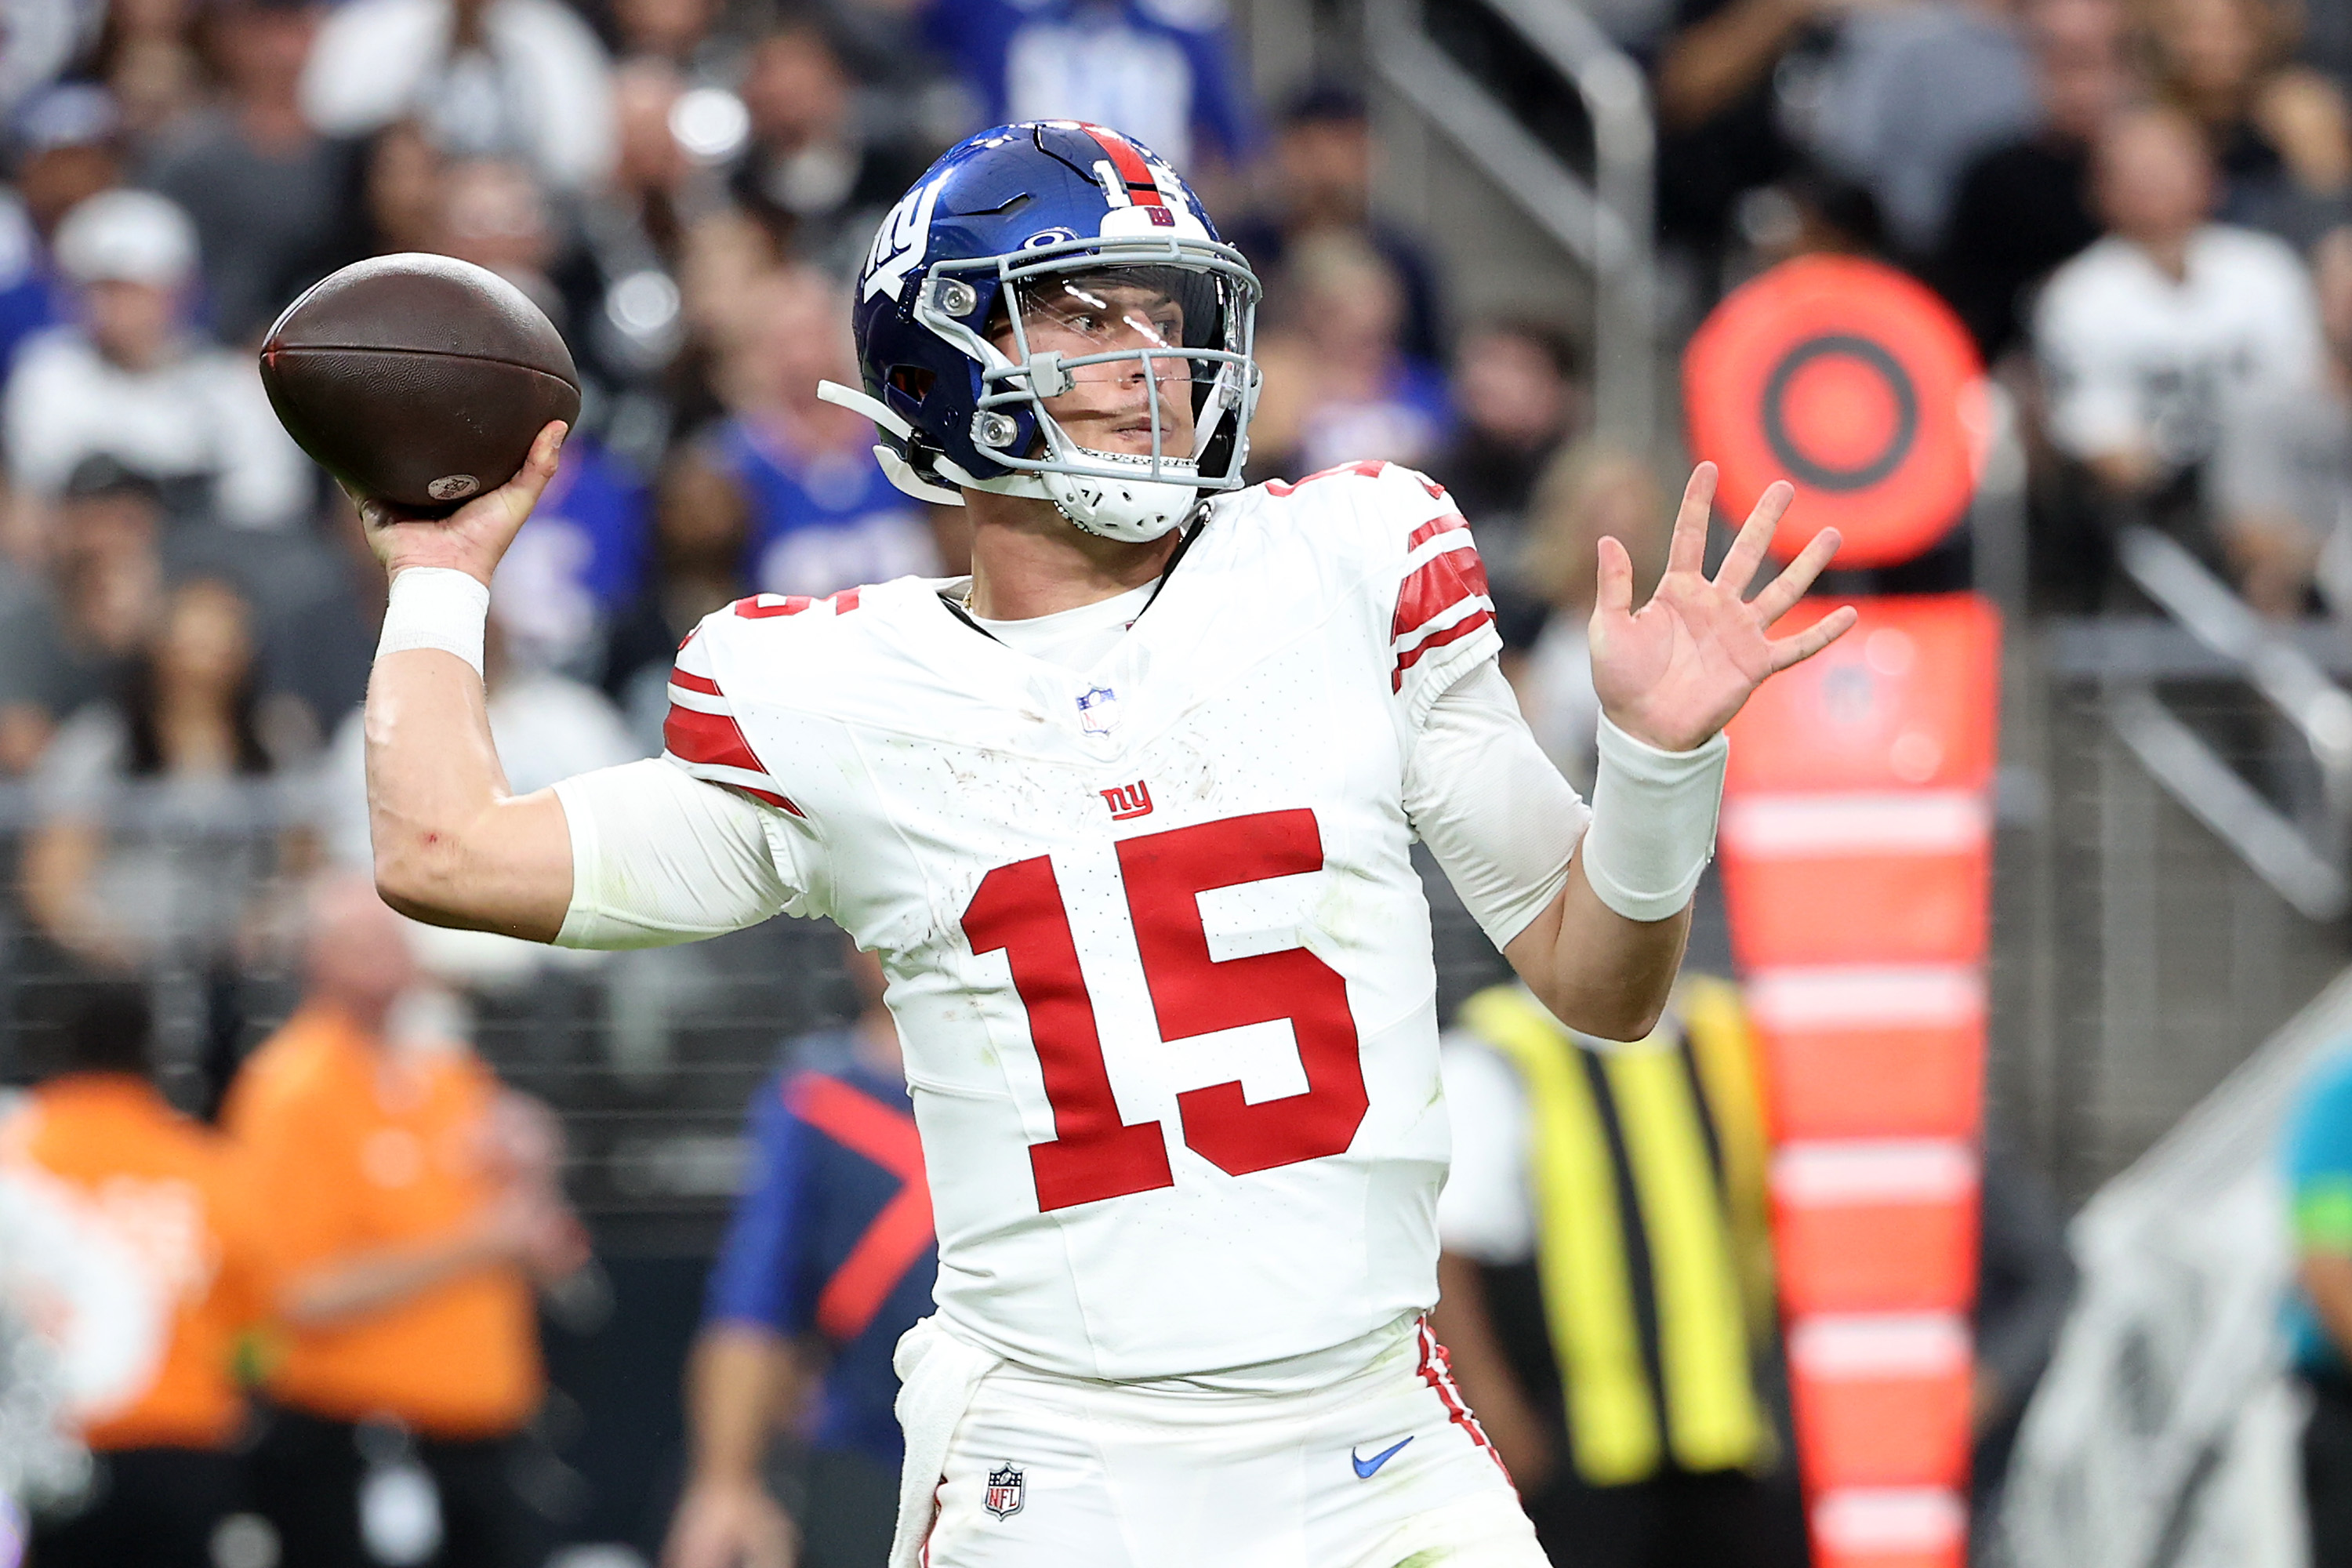 NJ's Tommy DeVito will be the first rookie QB to start for Giants